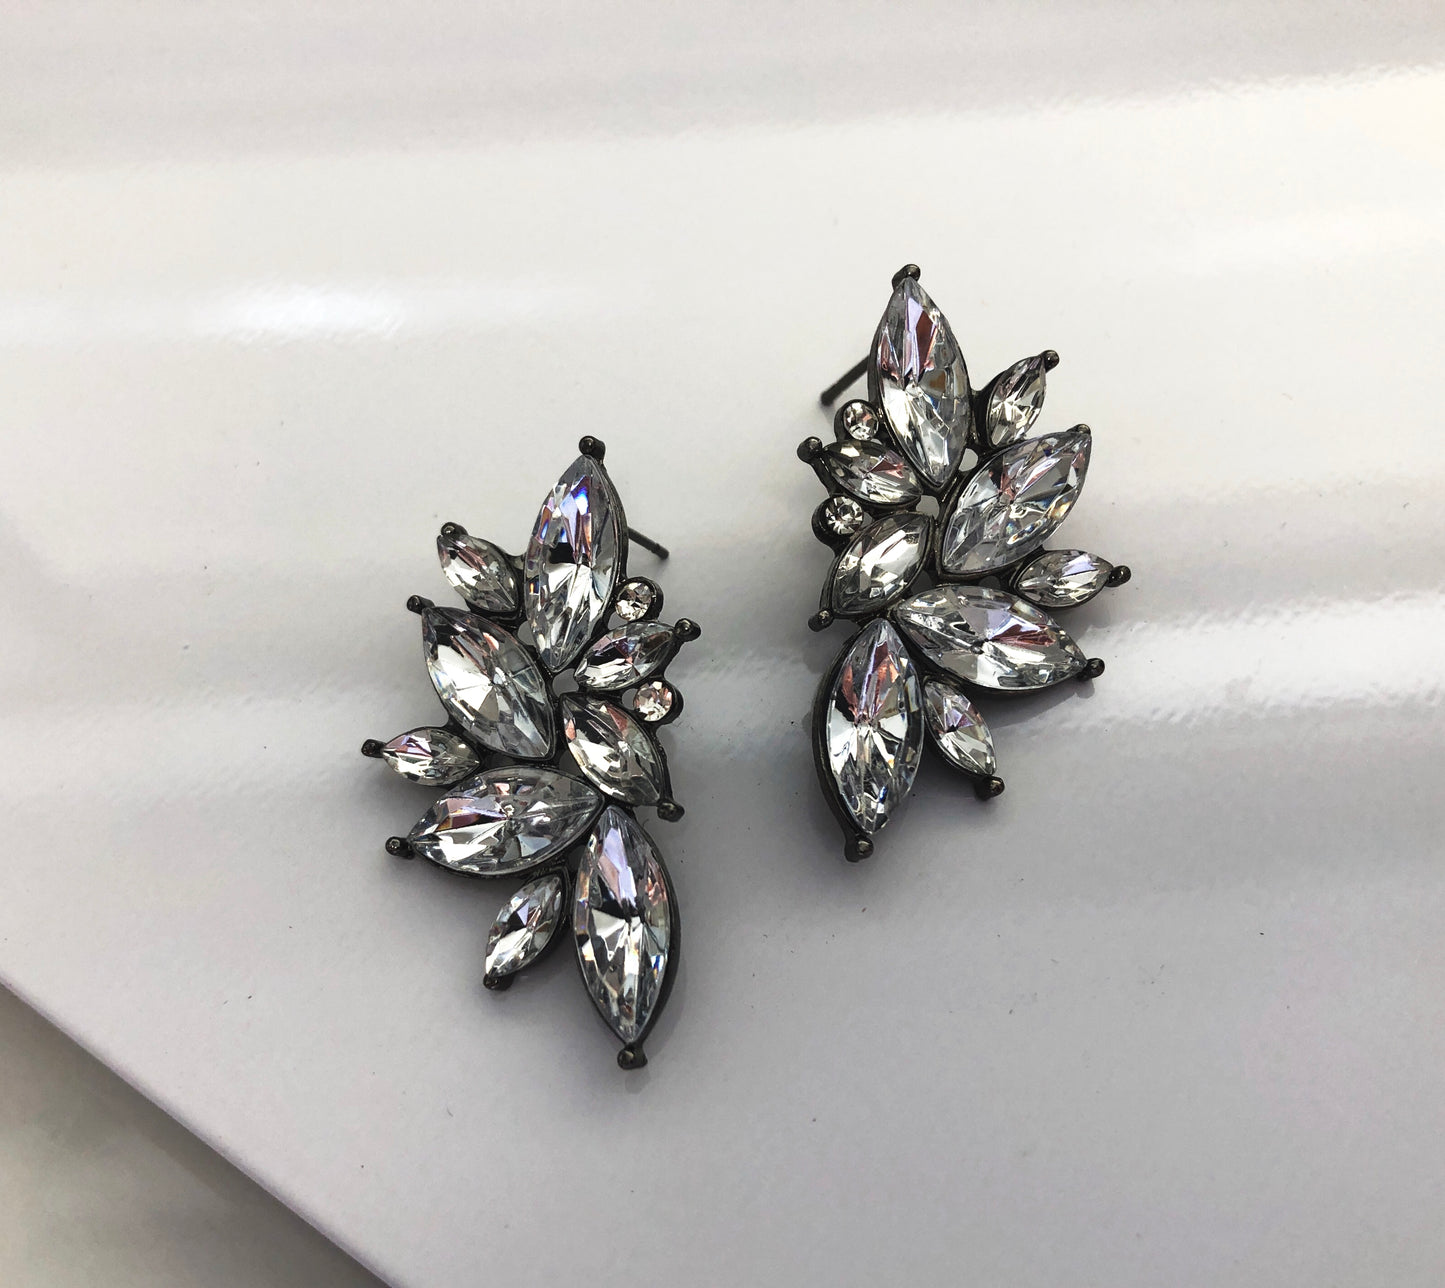 A beautiful and simple crystal stud, easily worn to dress up any outfit or add a little sparkle.